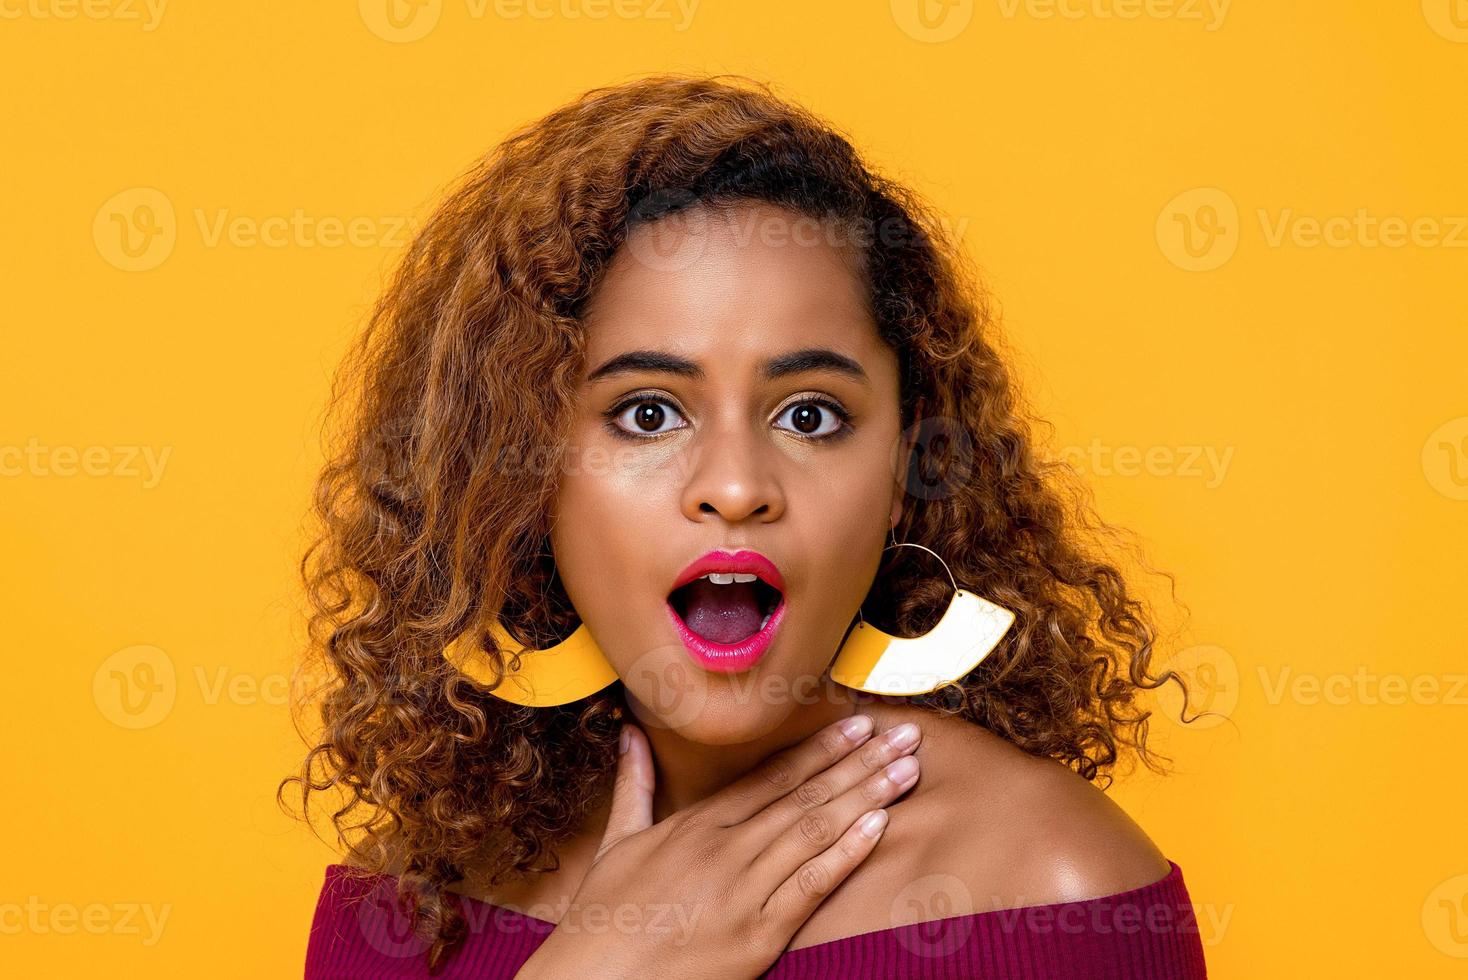 Close up portrait of astonished and surprised young beautiful African American woman looking at camera with mouth open in isolated studio yellow background photo